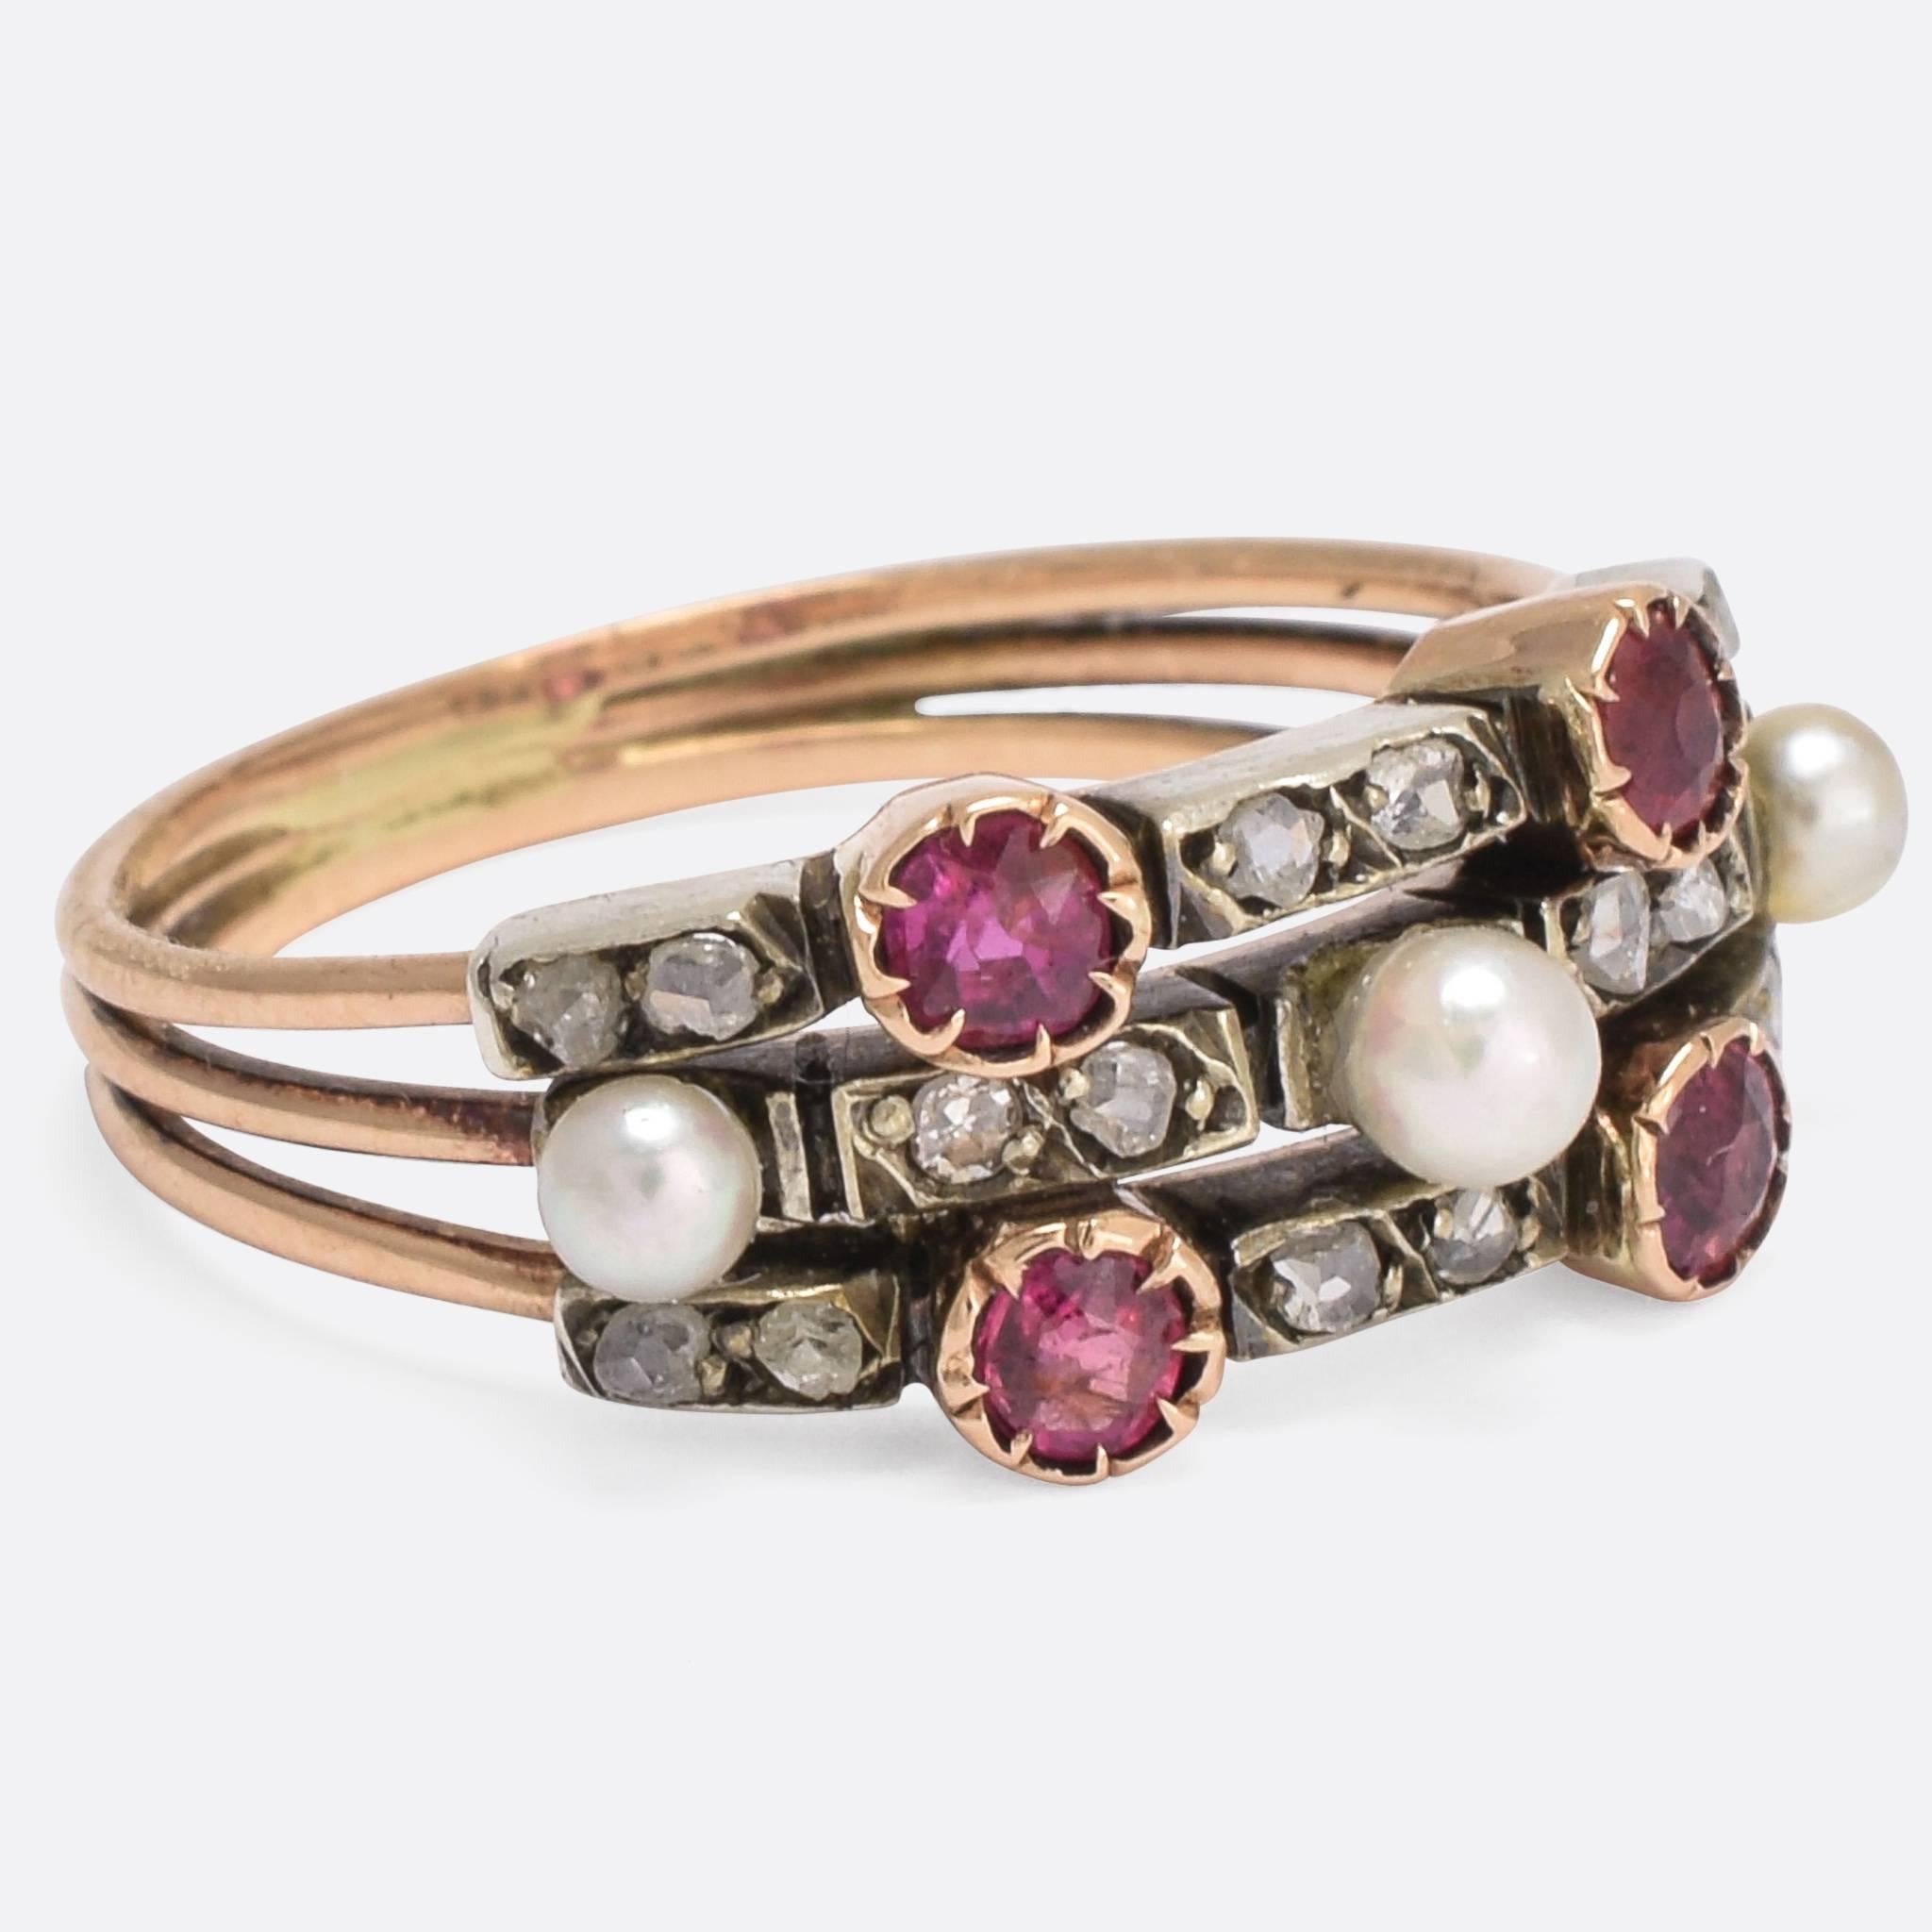 A beautiful three-band harem ring set with pearls, rubies, and rose cut diamonds. It dates to the late Victorian era, c.1900 - modelled in 15k gold with the diamonds set in detailed silver mounts. A fine example of the style.

STONES
Ruby, Diamond,